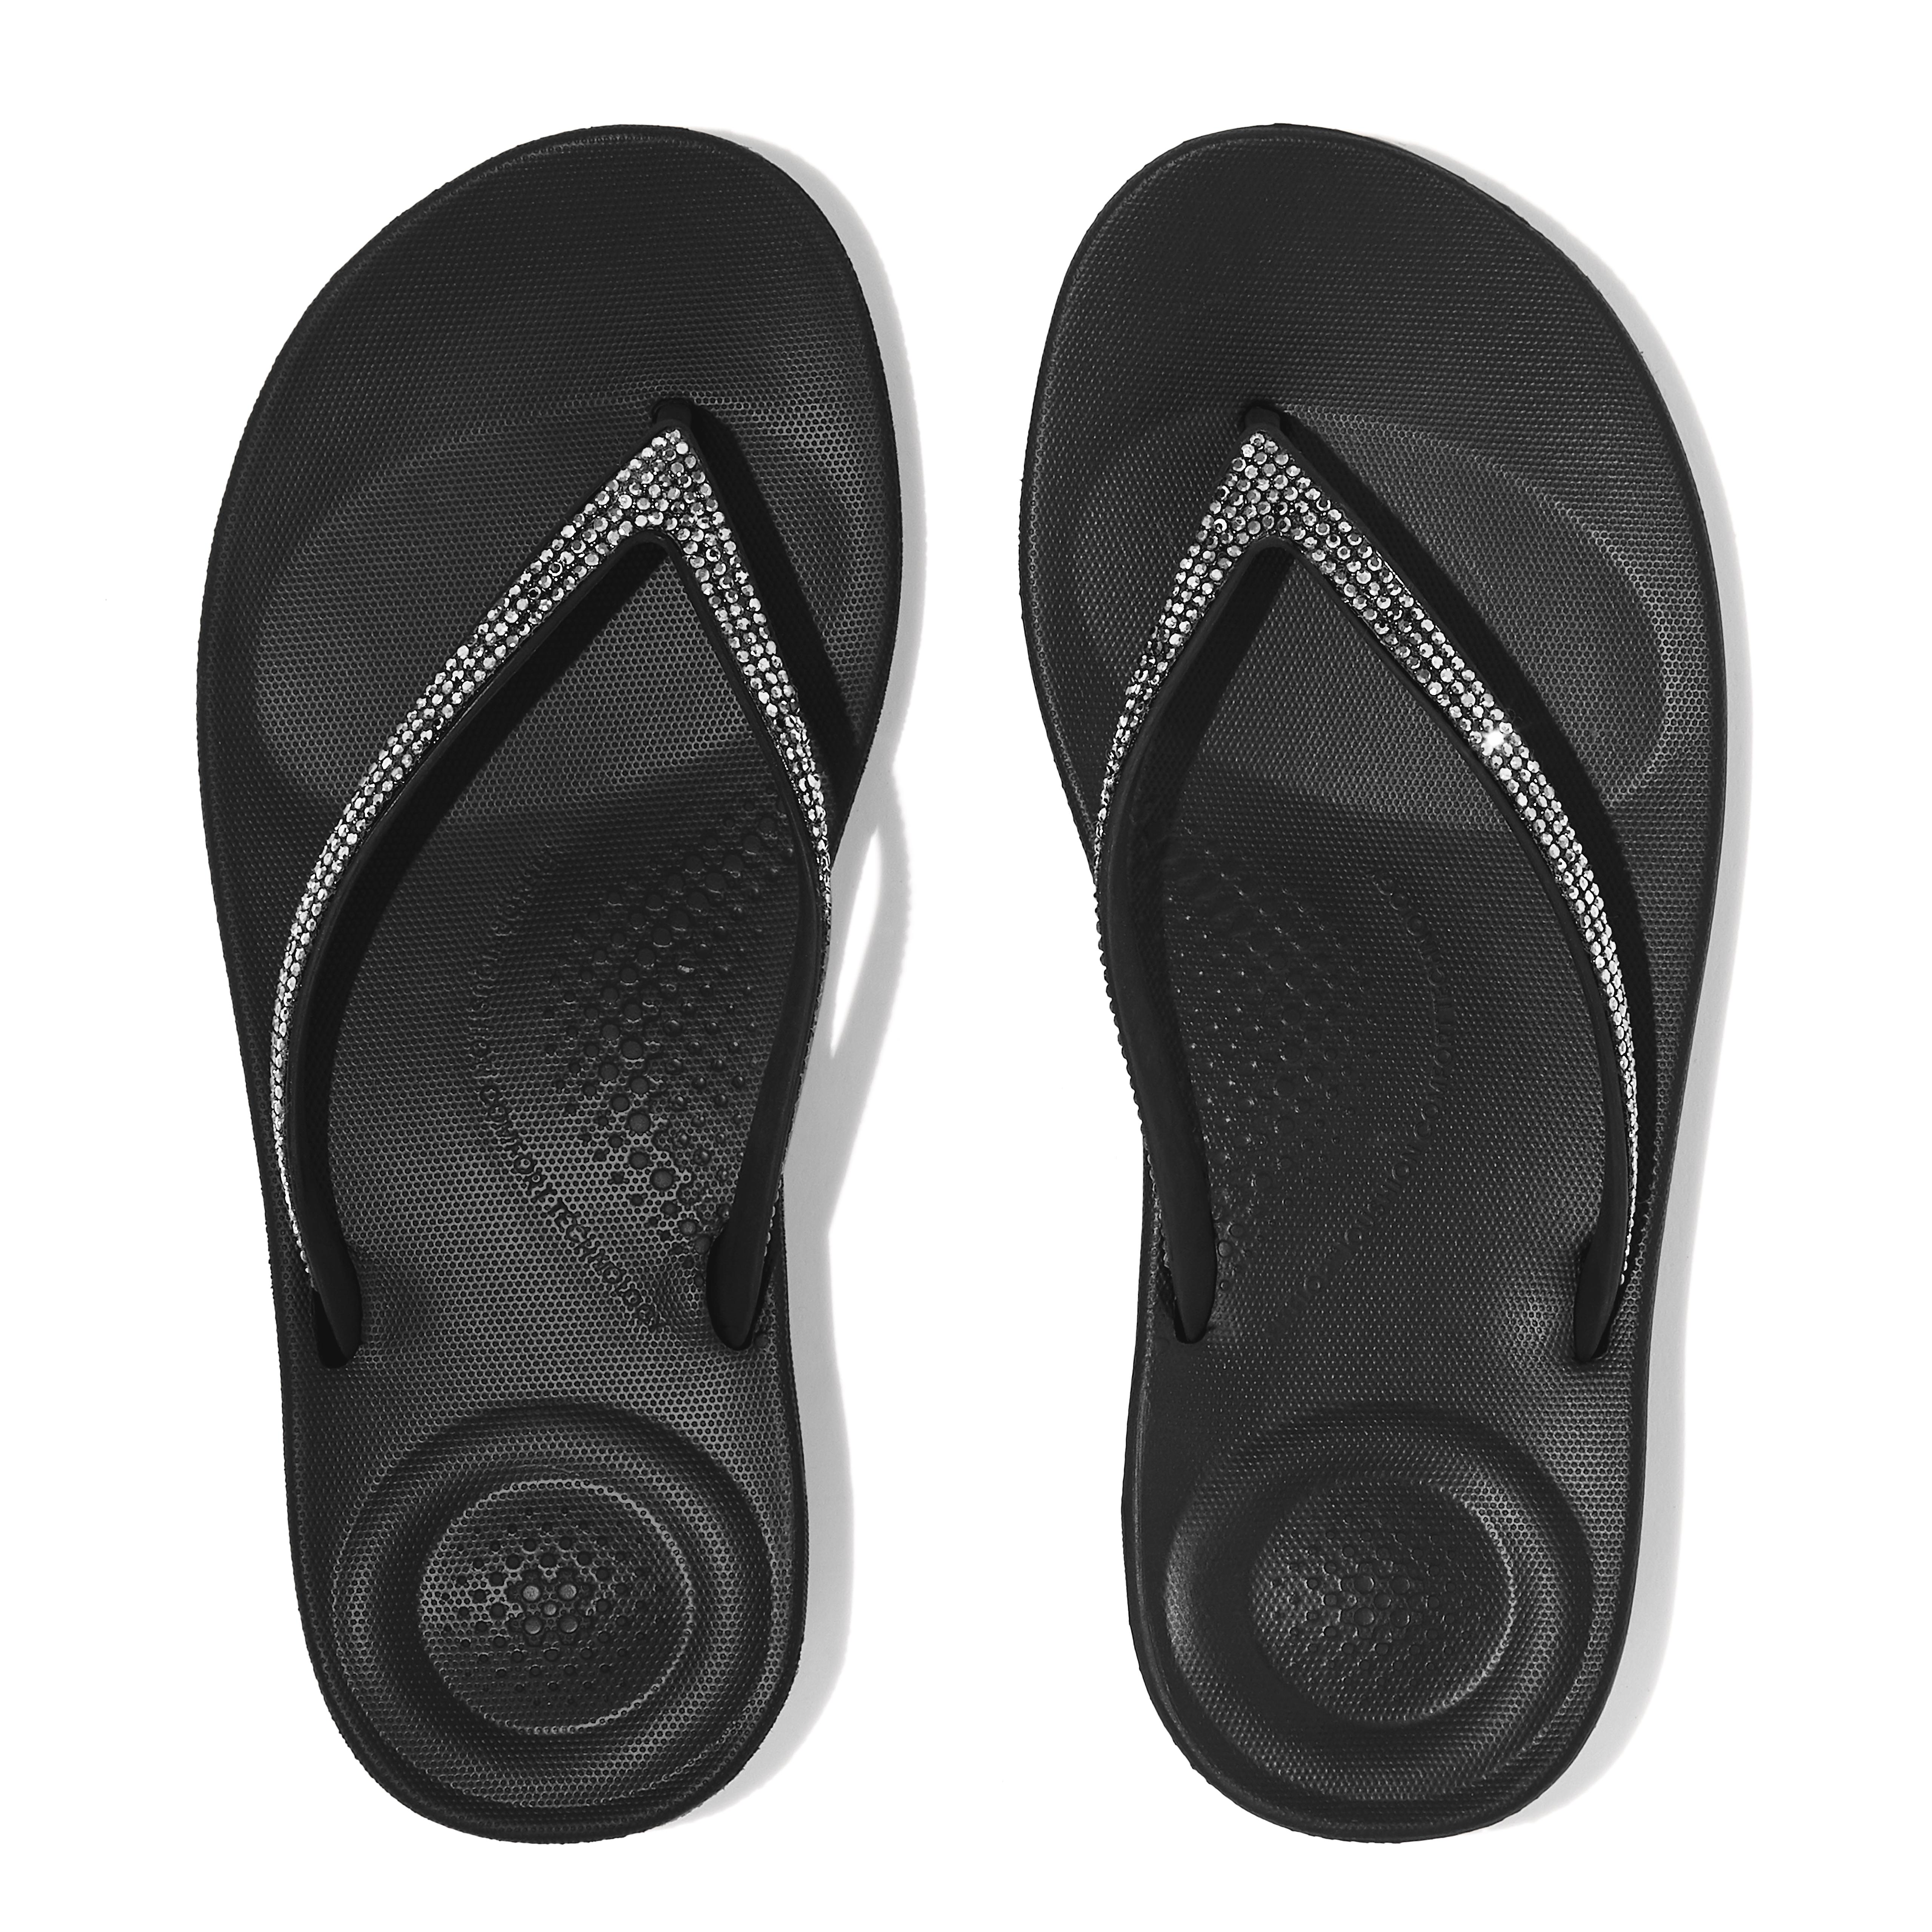 fitflop slippers for women